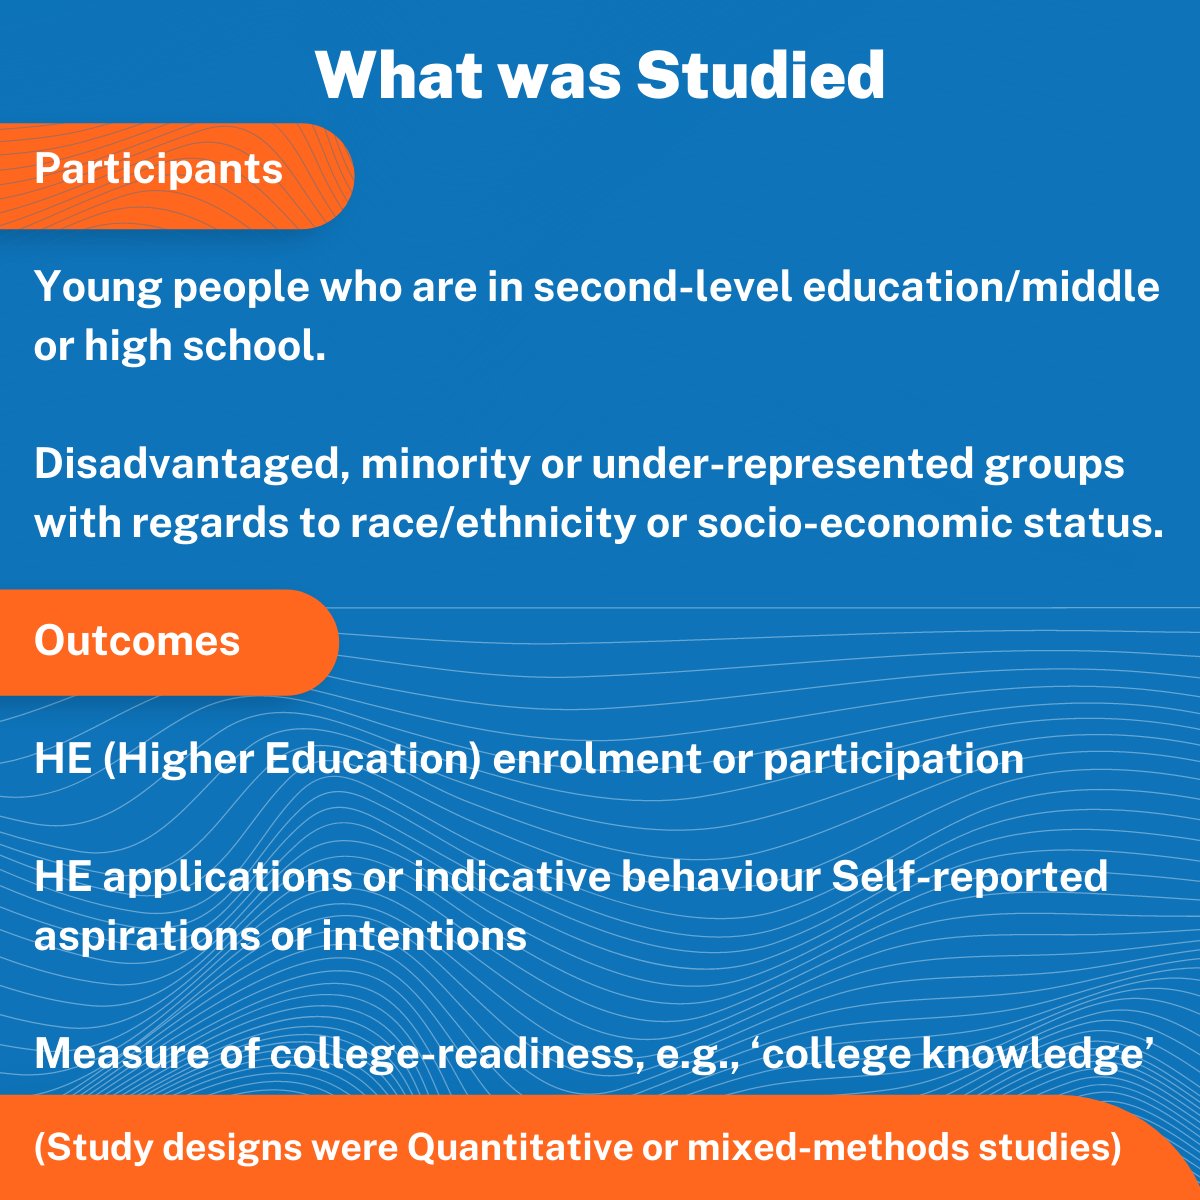 📢Exciting research 10 years in the making📢
👉bit.ly/3CA7Zwg
'A systematic review of #wideningparticipation: Exploring the effectiveness of outreach programmes for students in second-level schools'
@EilisNiChorcora  @bankoninclusion @AibhnBray  
#Edchatie